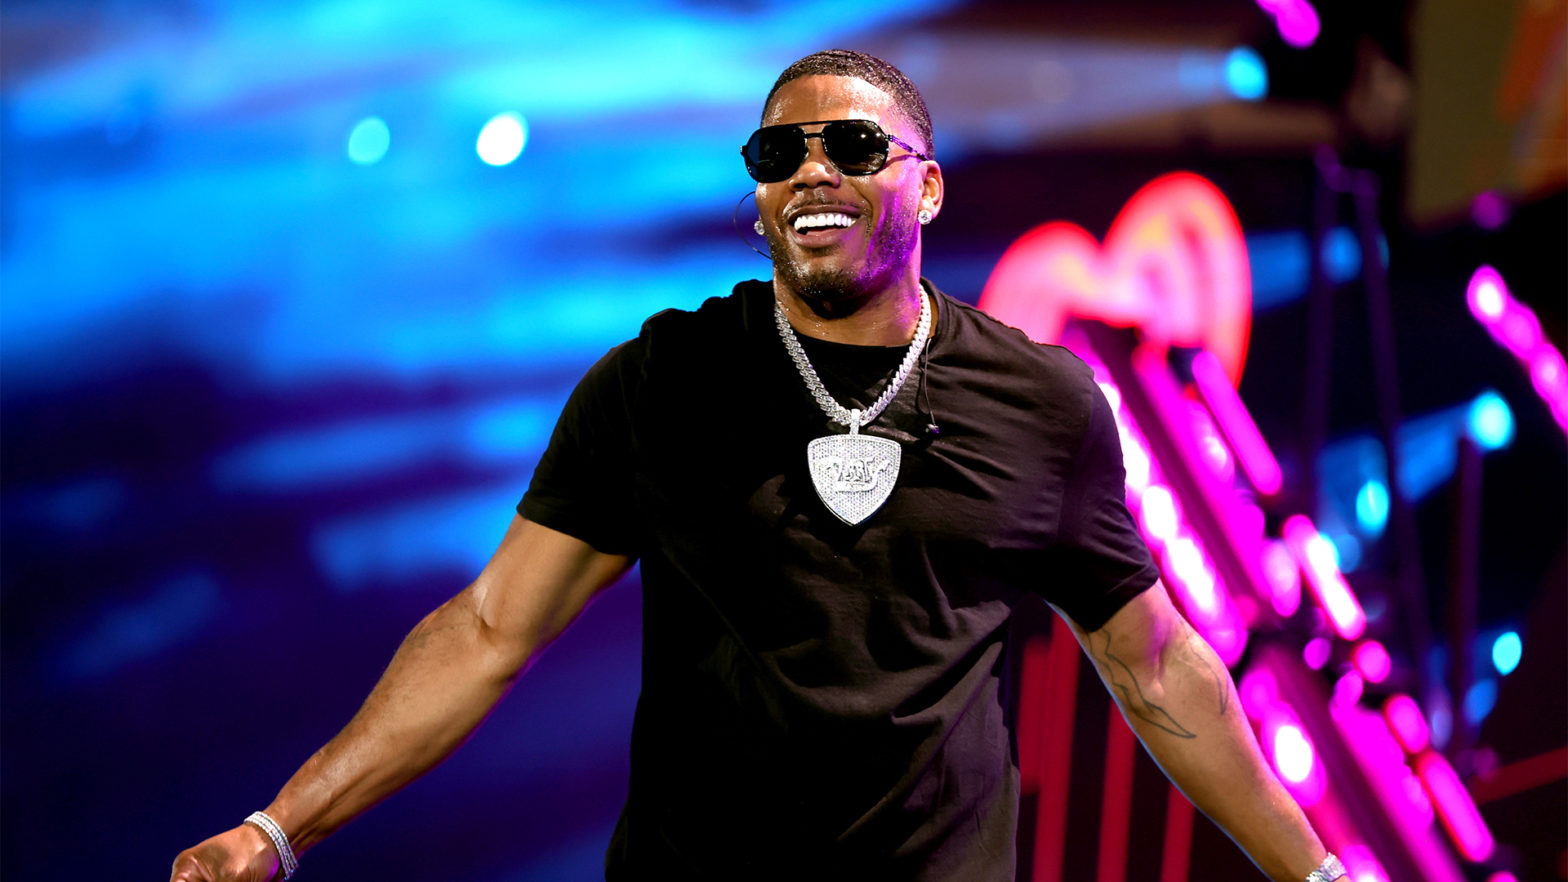 Nelly Claims The Price Of Air Force 1s Increased After His Hit Single In 2002 — 'We Ain't Get Not Residuals'